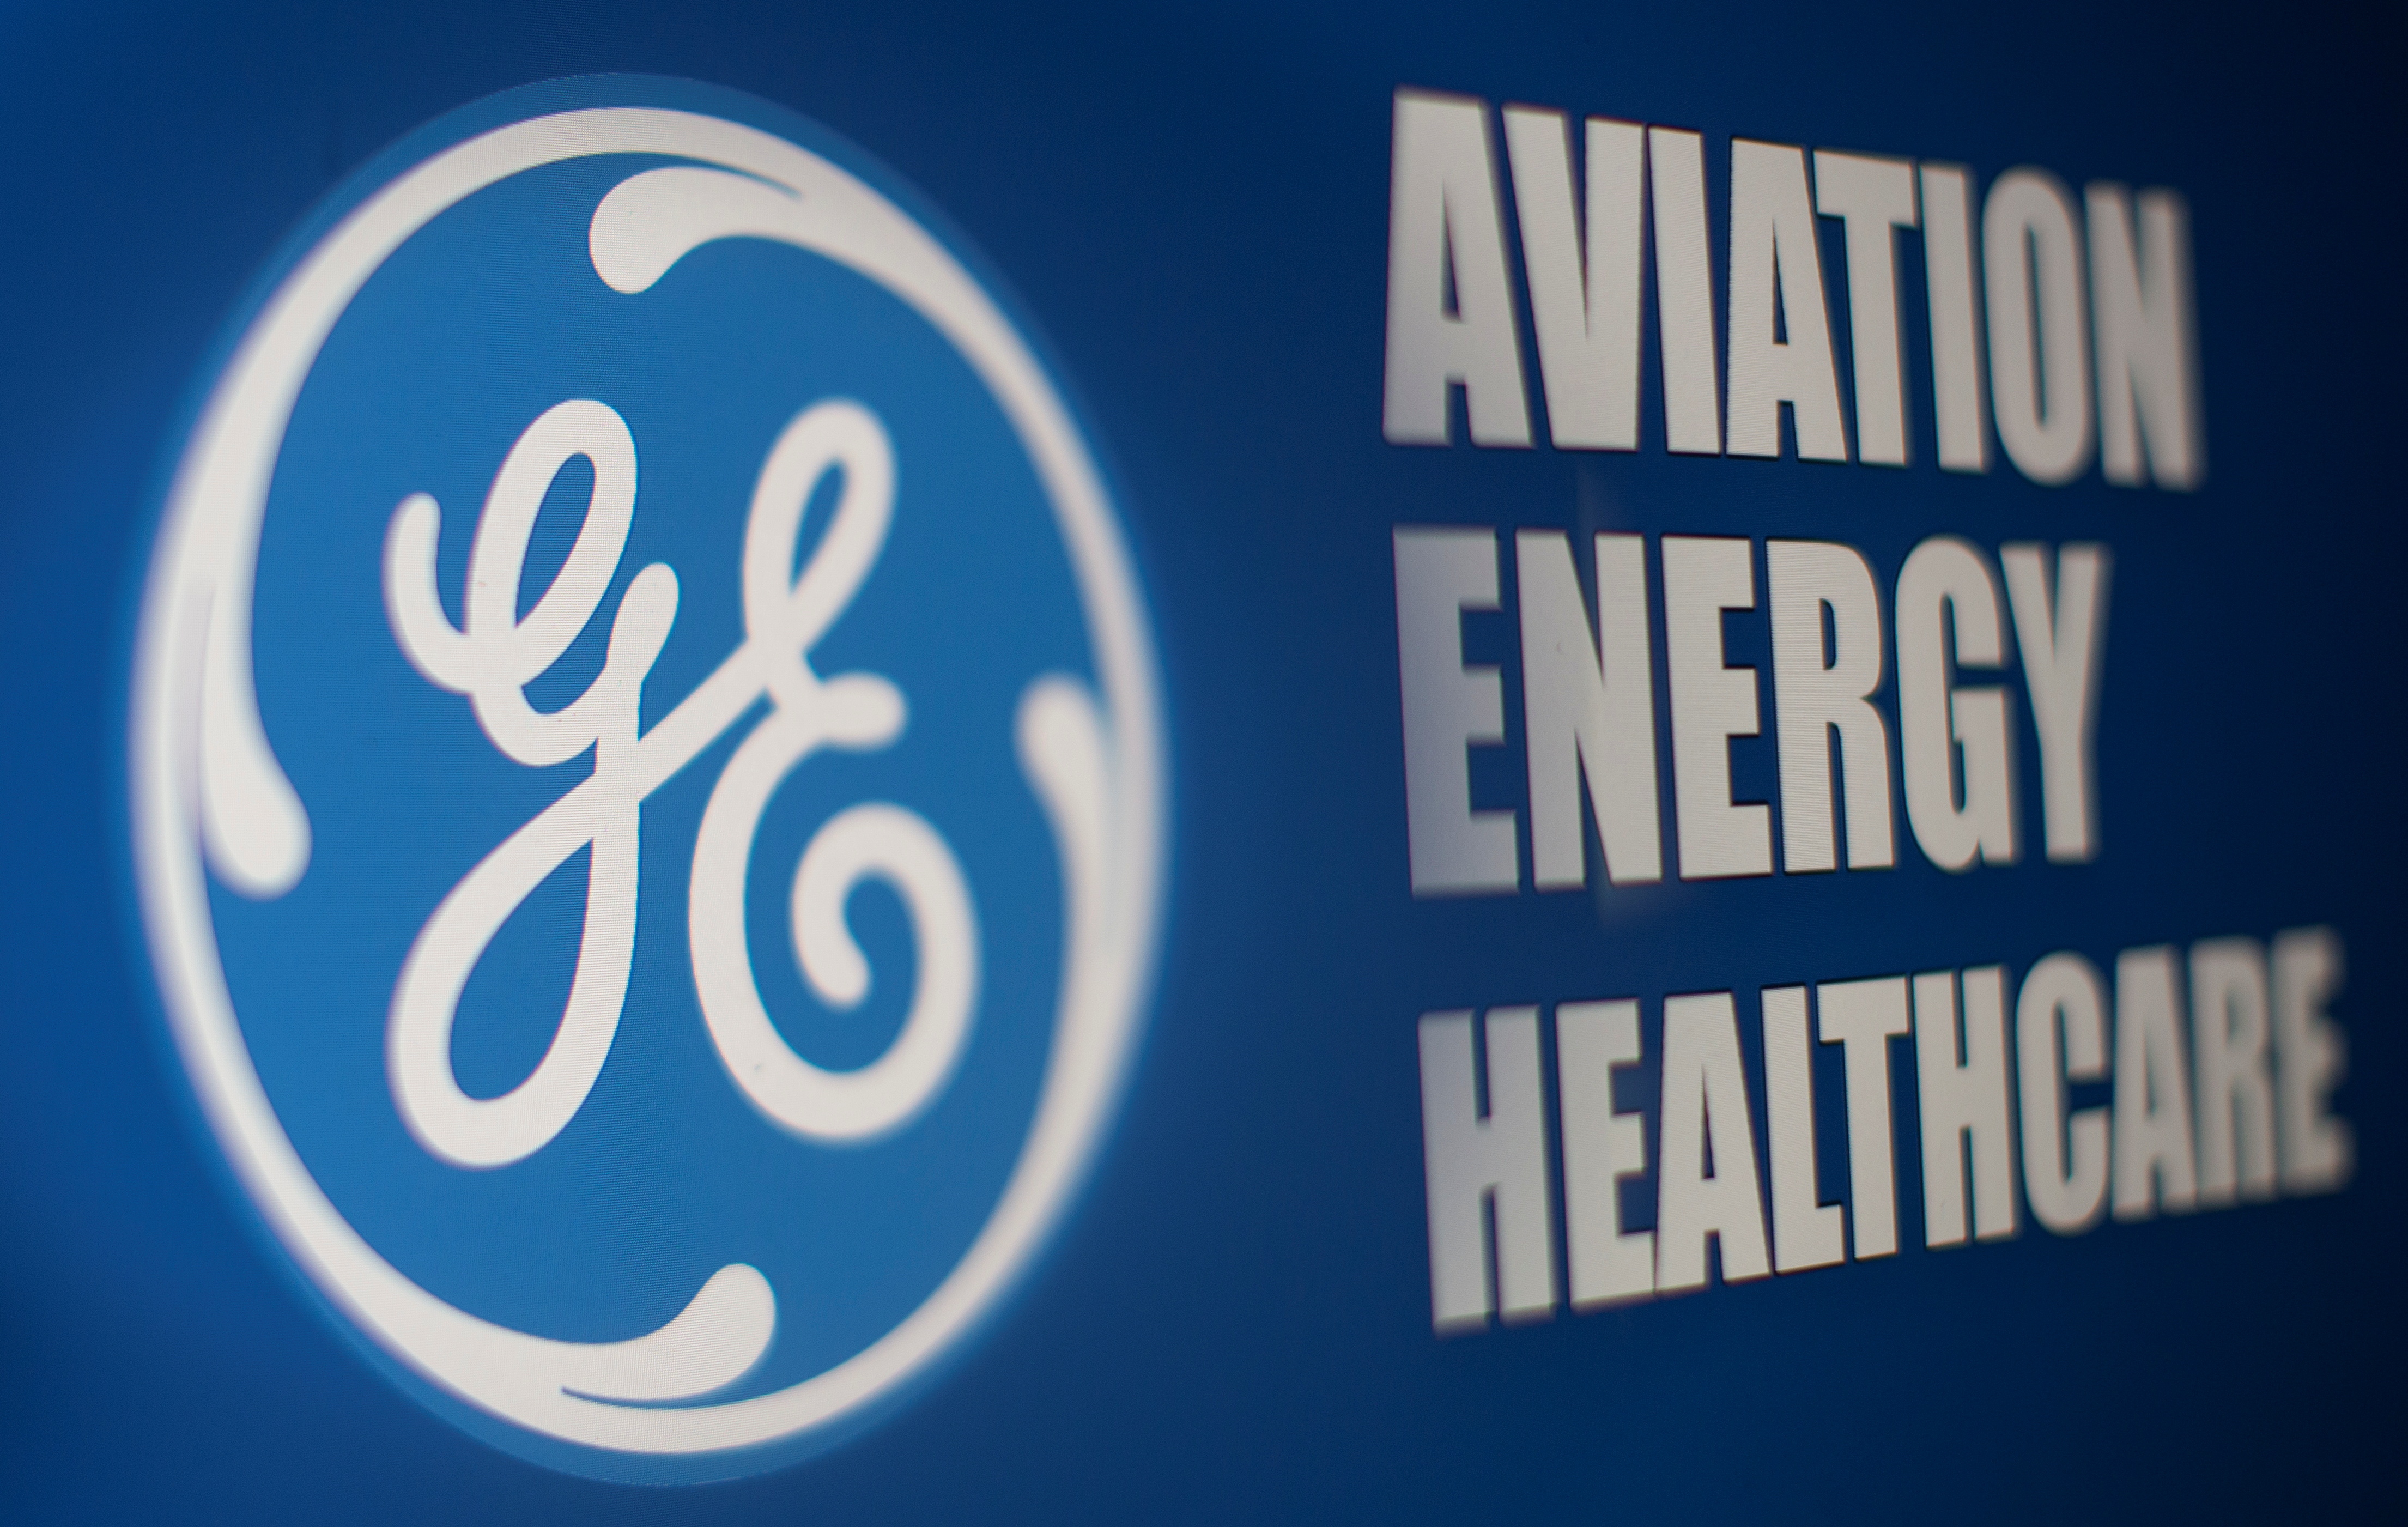 General Electric logo is seen through magnifier in front of displayed Aviation, Energy, Healthcare words in this illustration taken